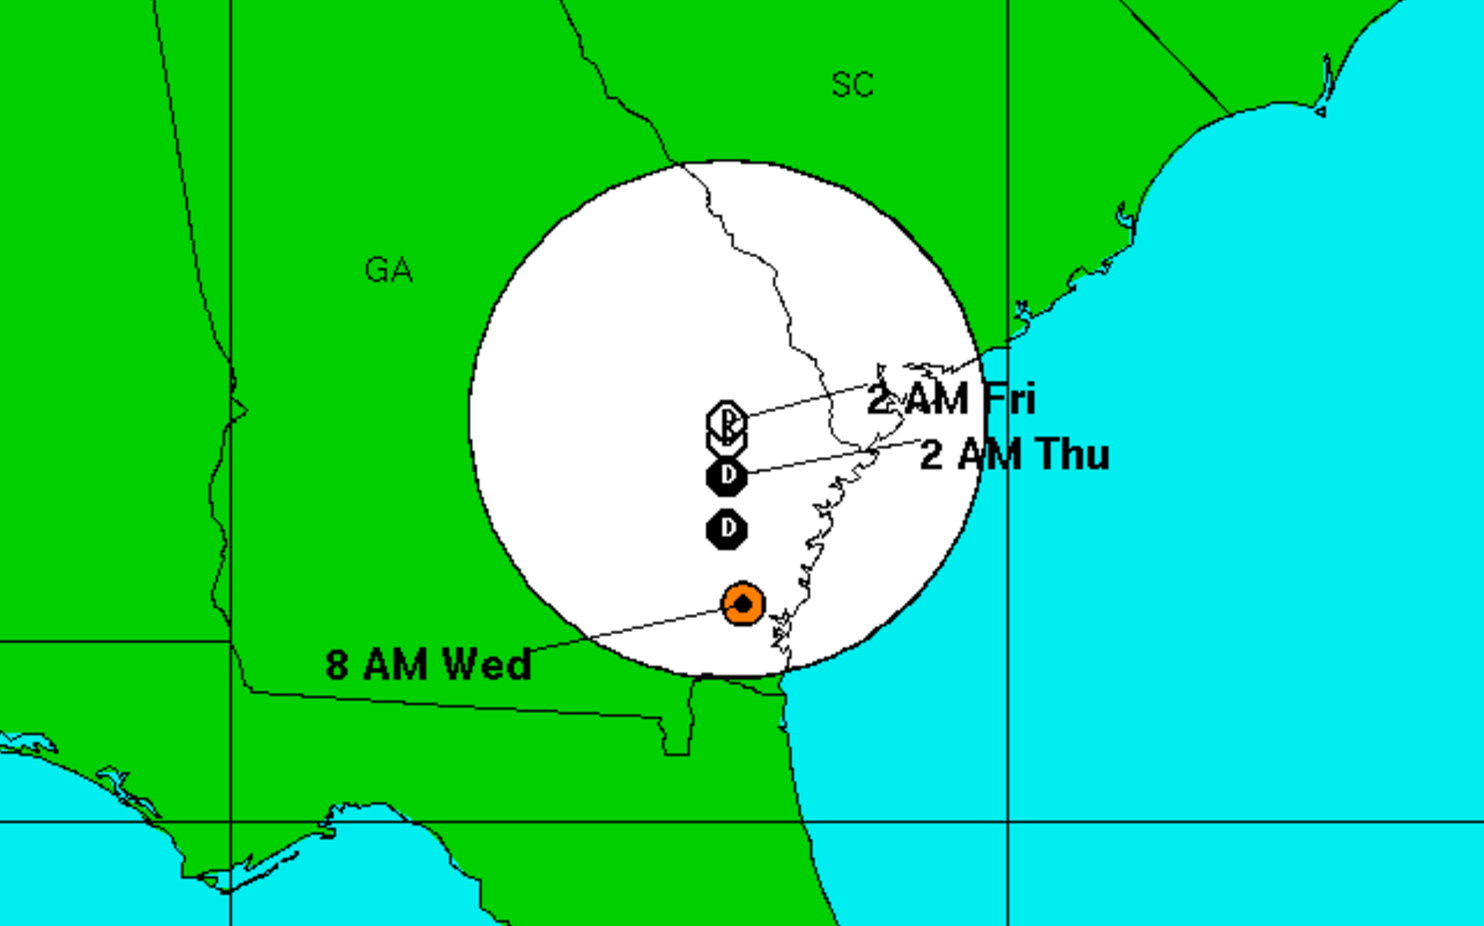 Tropical Storm Julia's expected track as of 8 a.m Wednesday. (Image: National Hurricane Center)